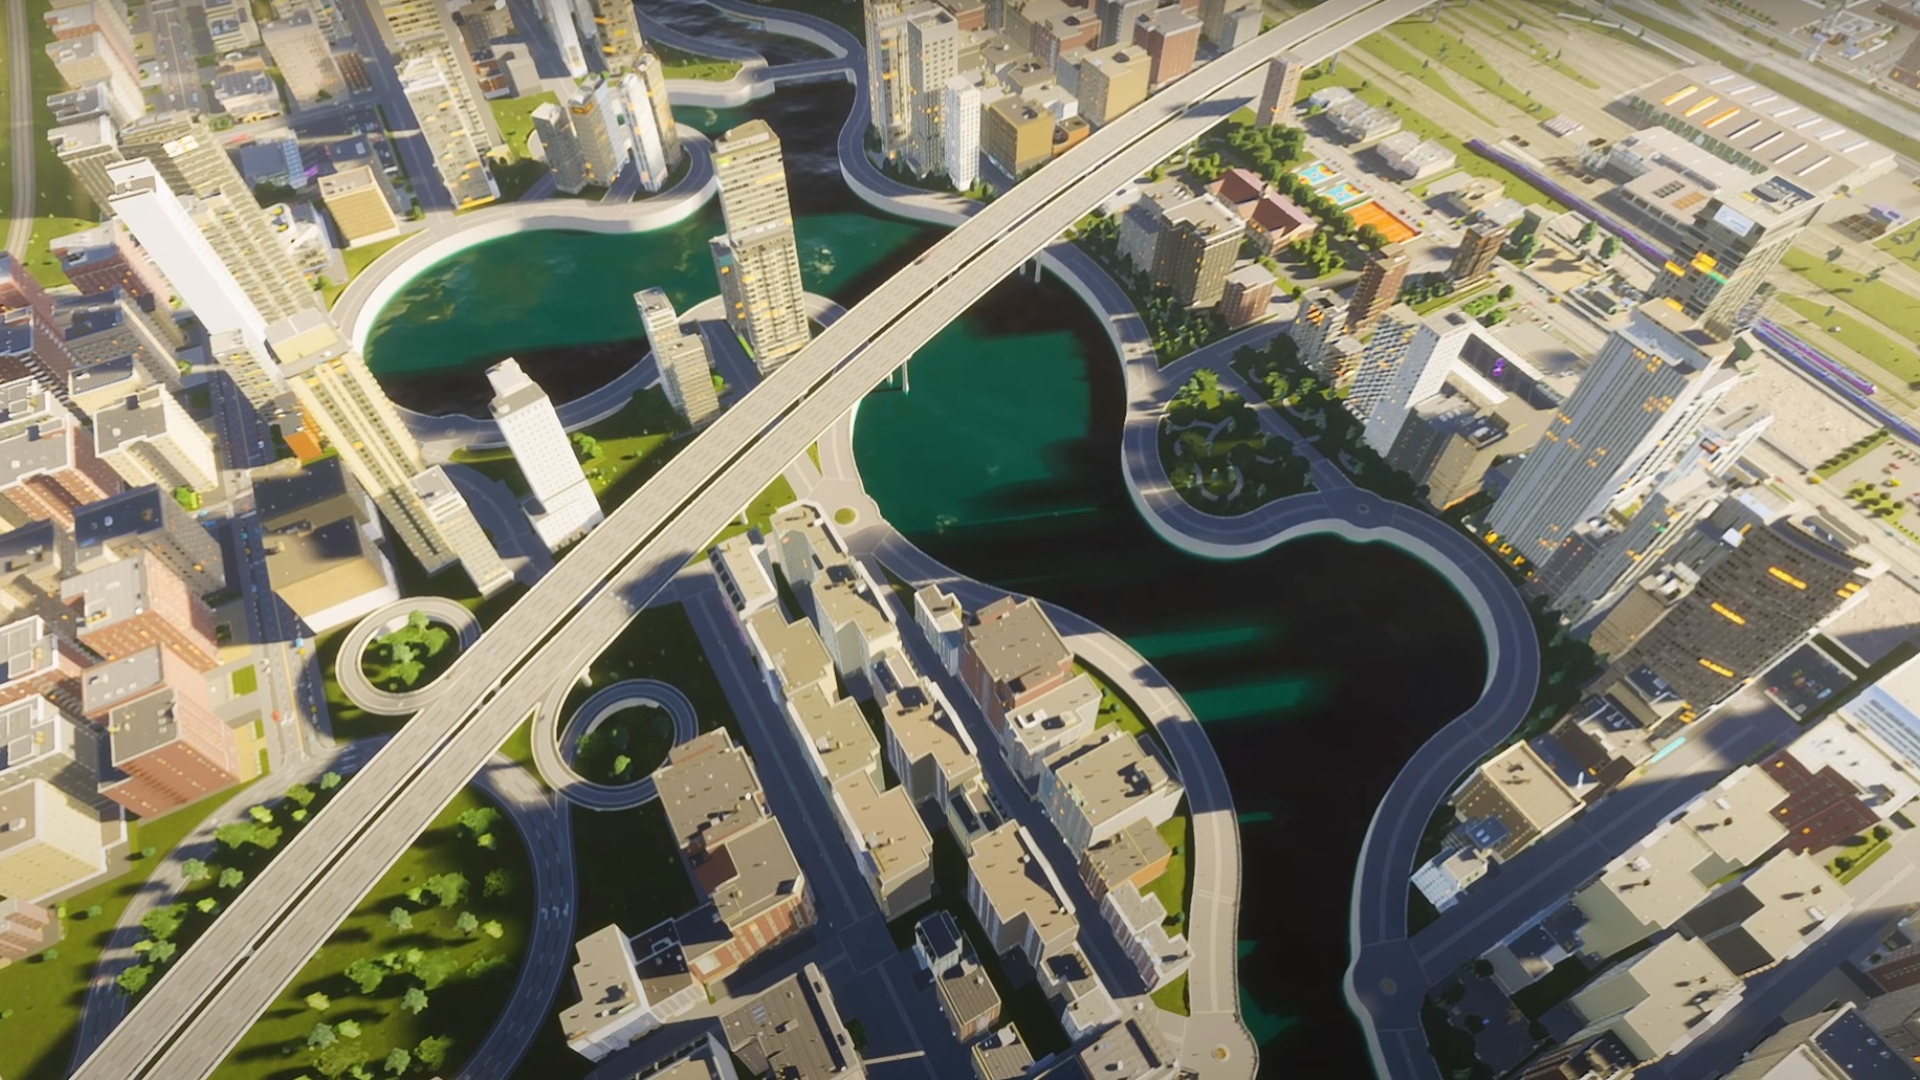 Cities Skylines 2 first performance patch hits Steam but not Game